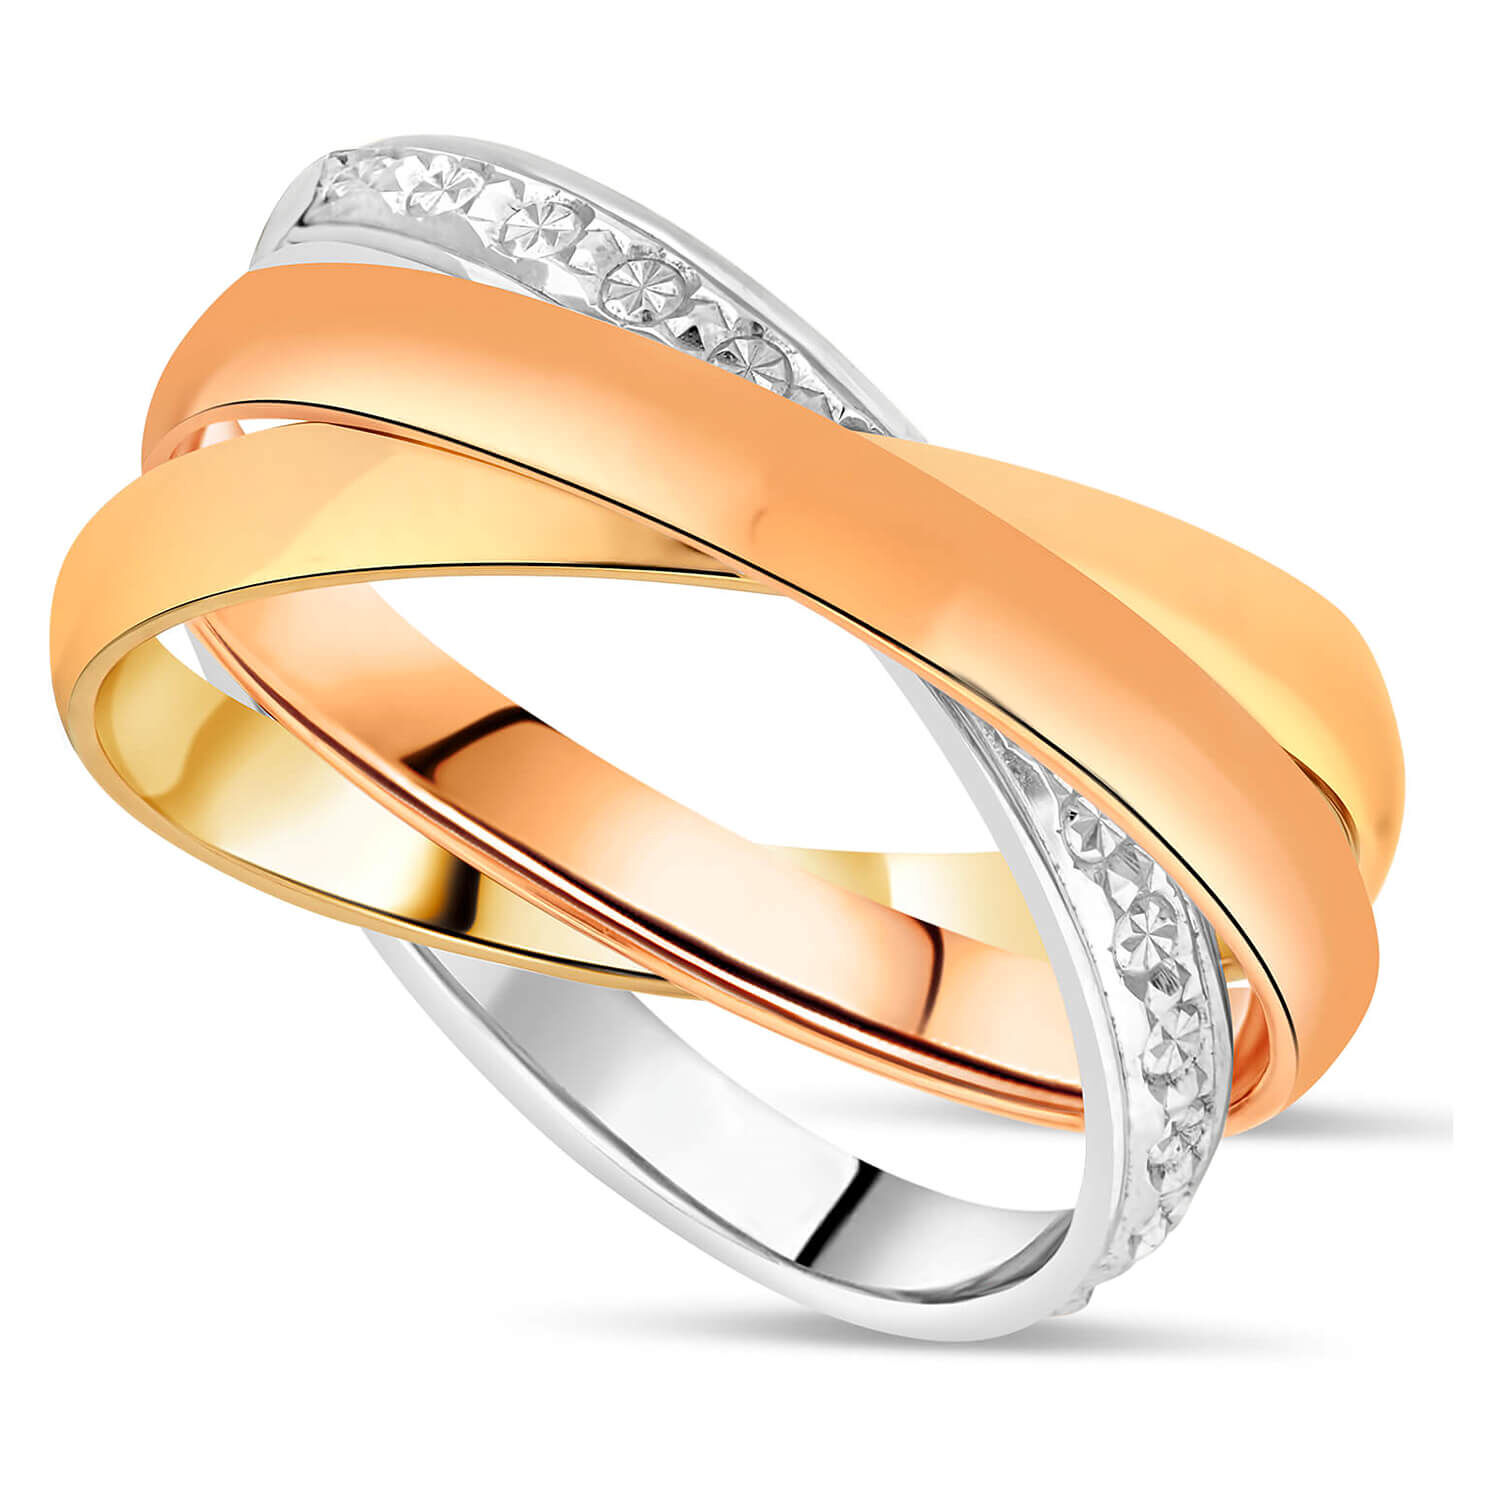 Tri Colour Steel Russian Wedding Ring | Stainless Steel Rings | Suay Design